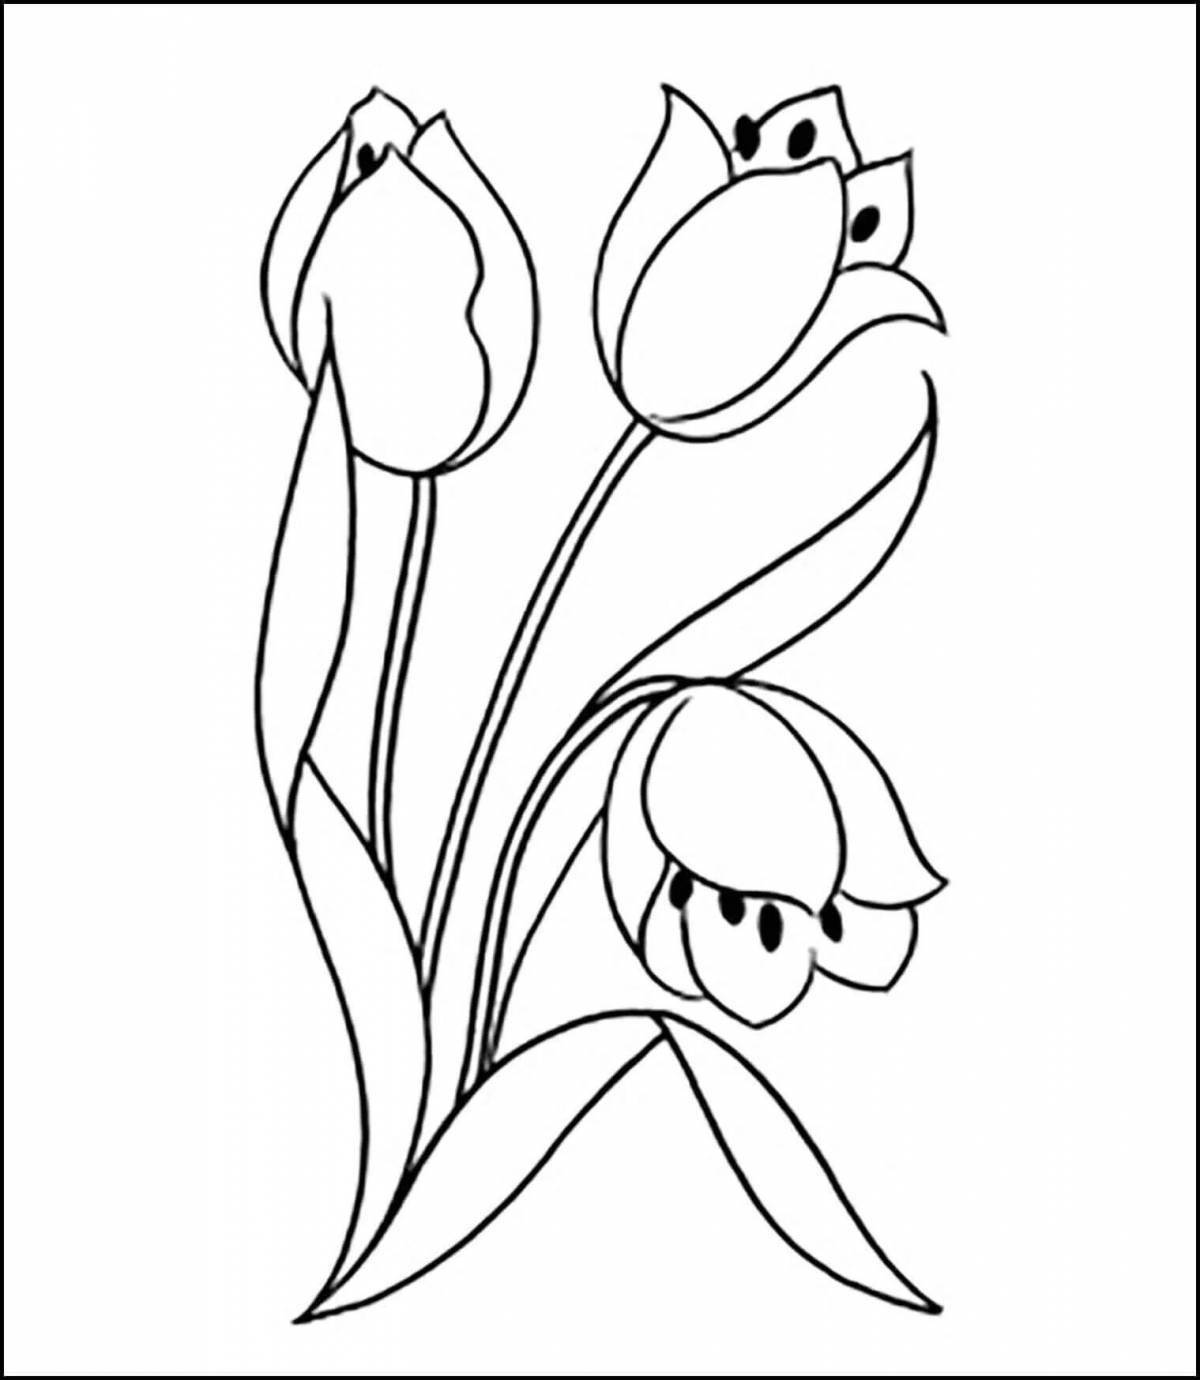 Charming tulip coloring book for March 8th